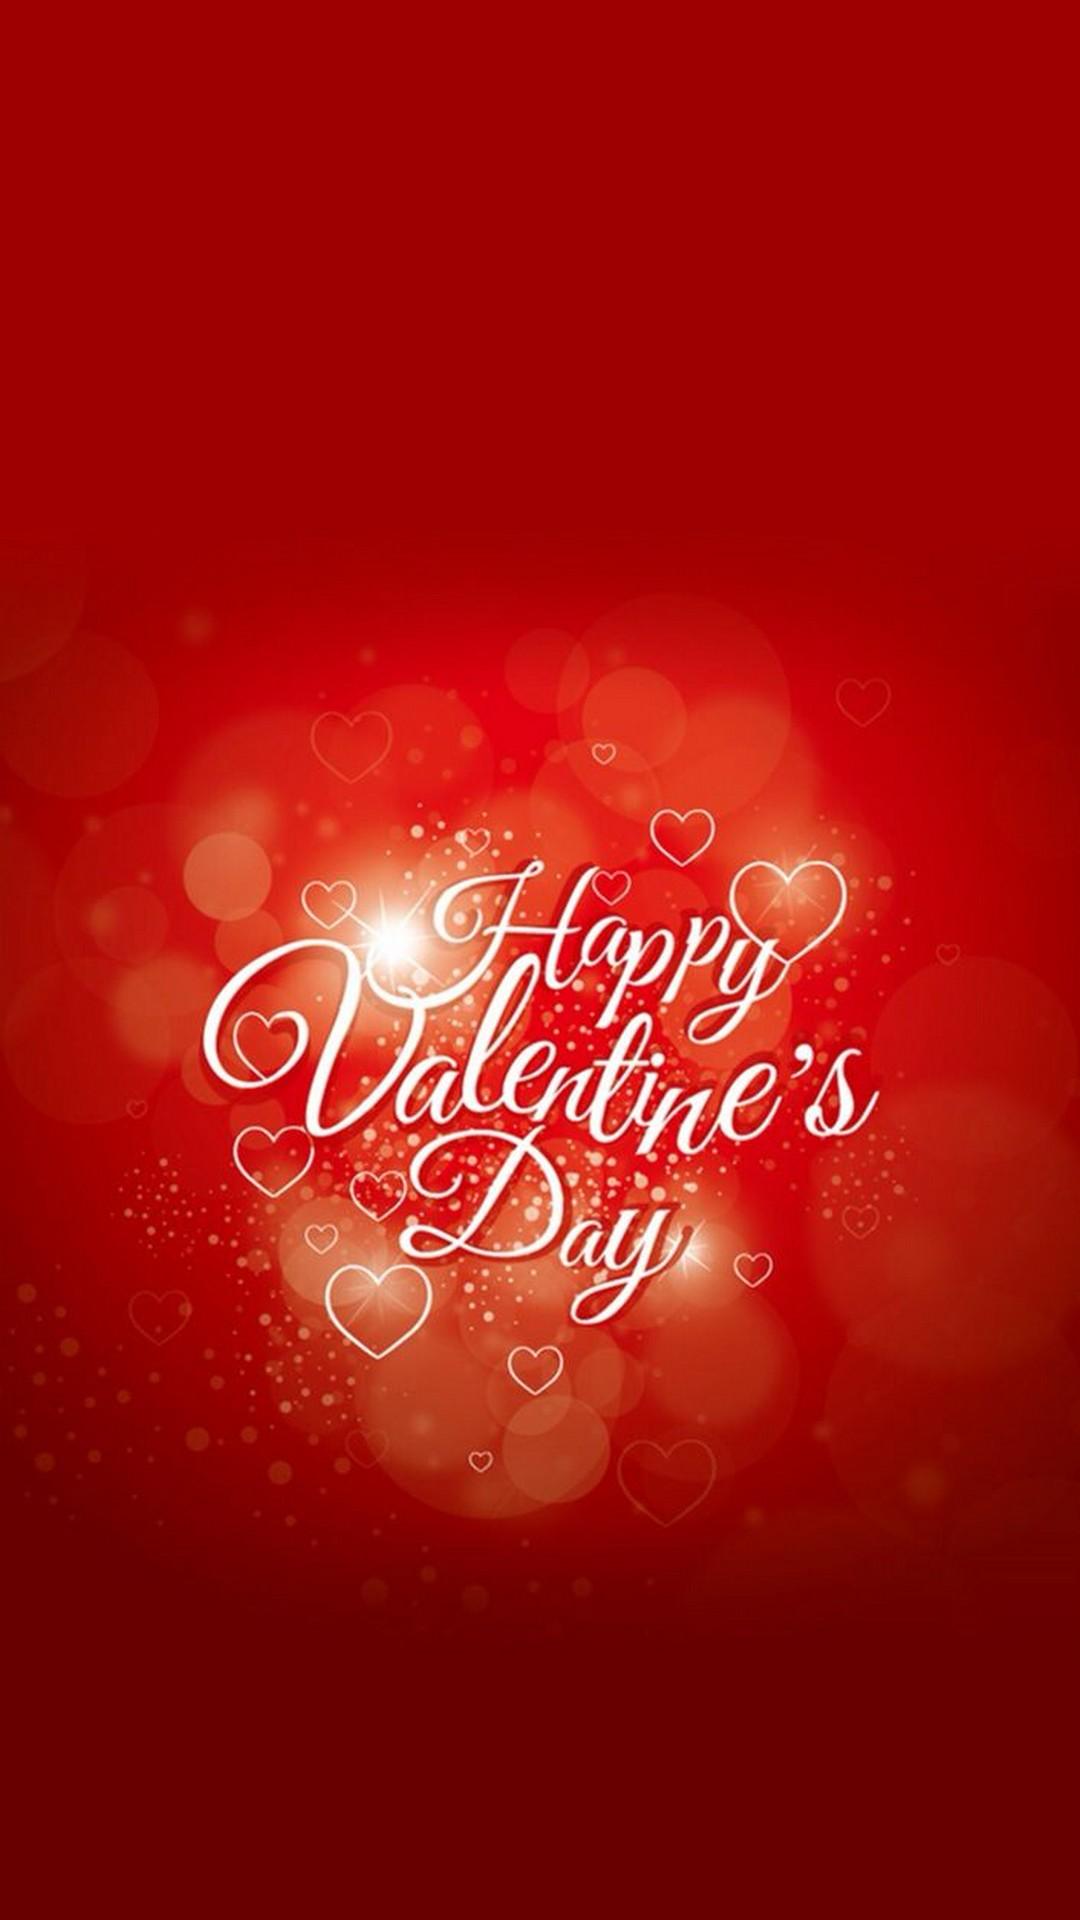 Android Wallpaper HD Happy Valentines Day Image Android Wallpaper